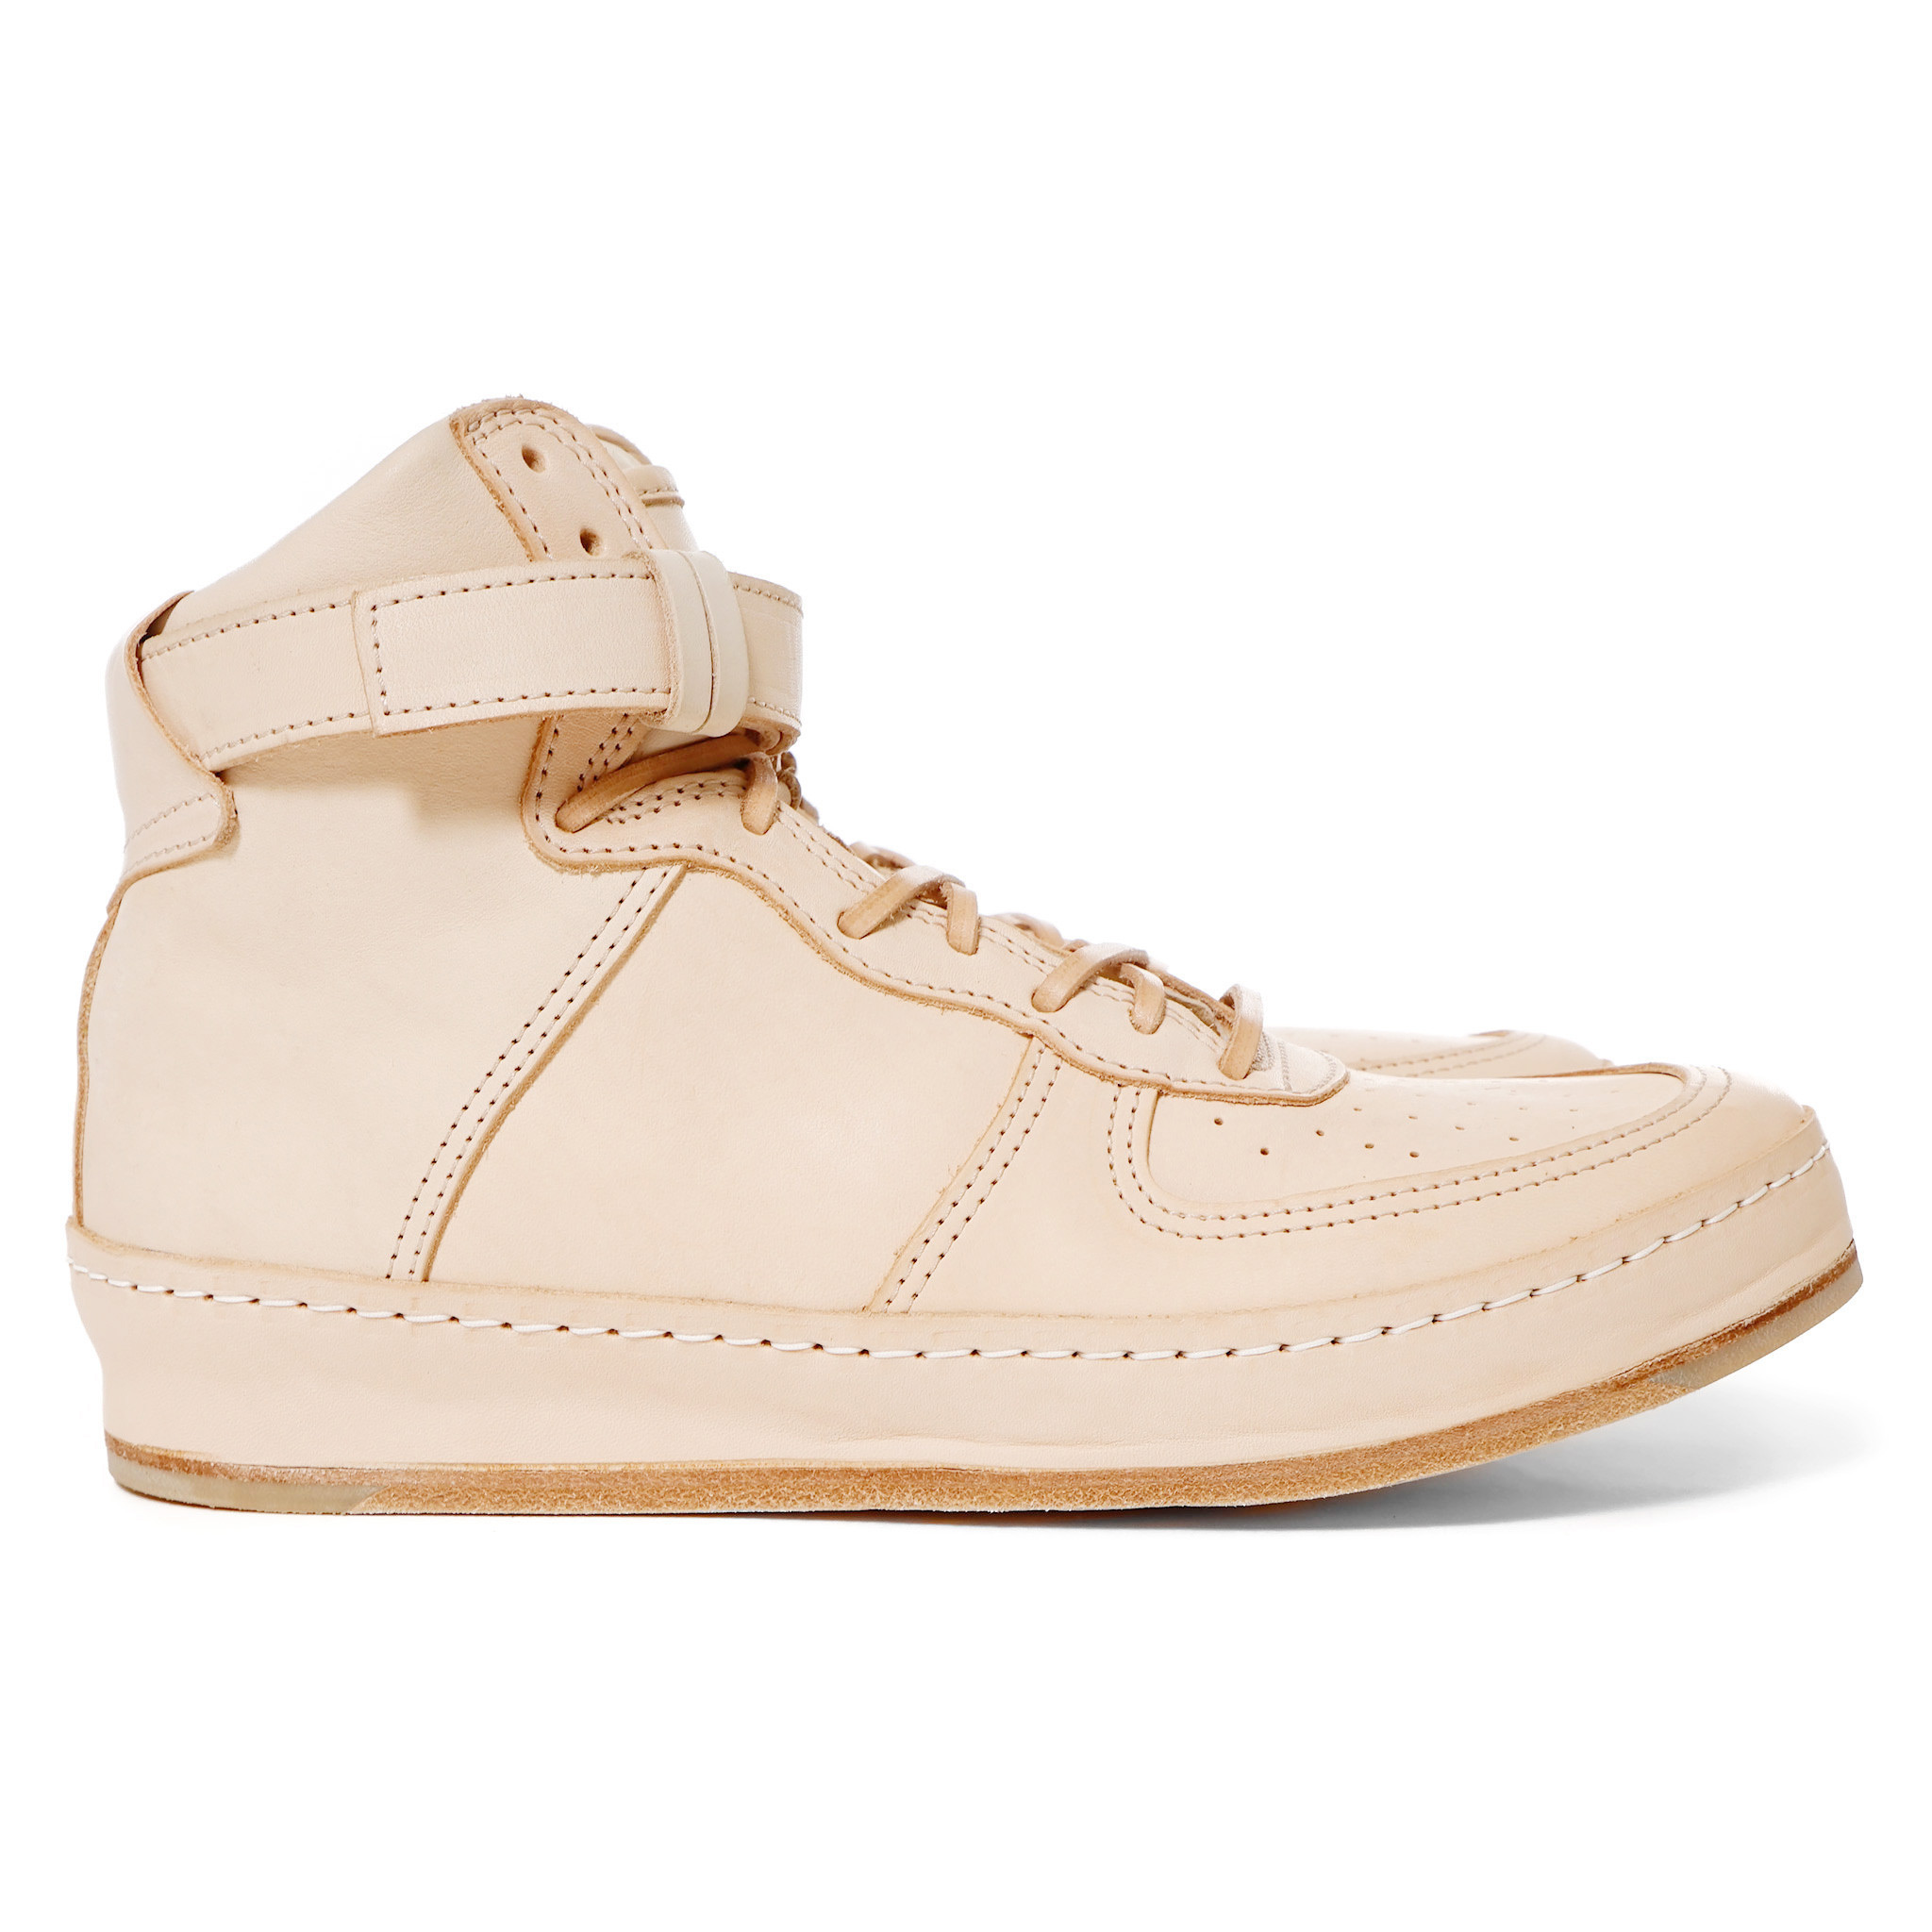 #STYLE // Hender Scheme Manual Industrial Product 01